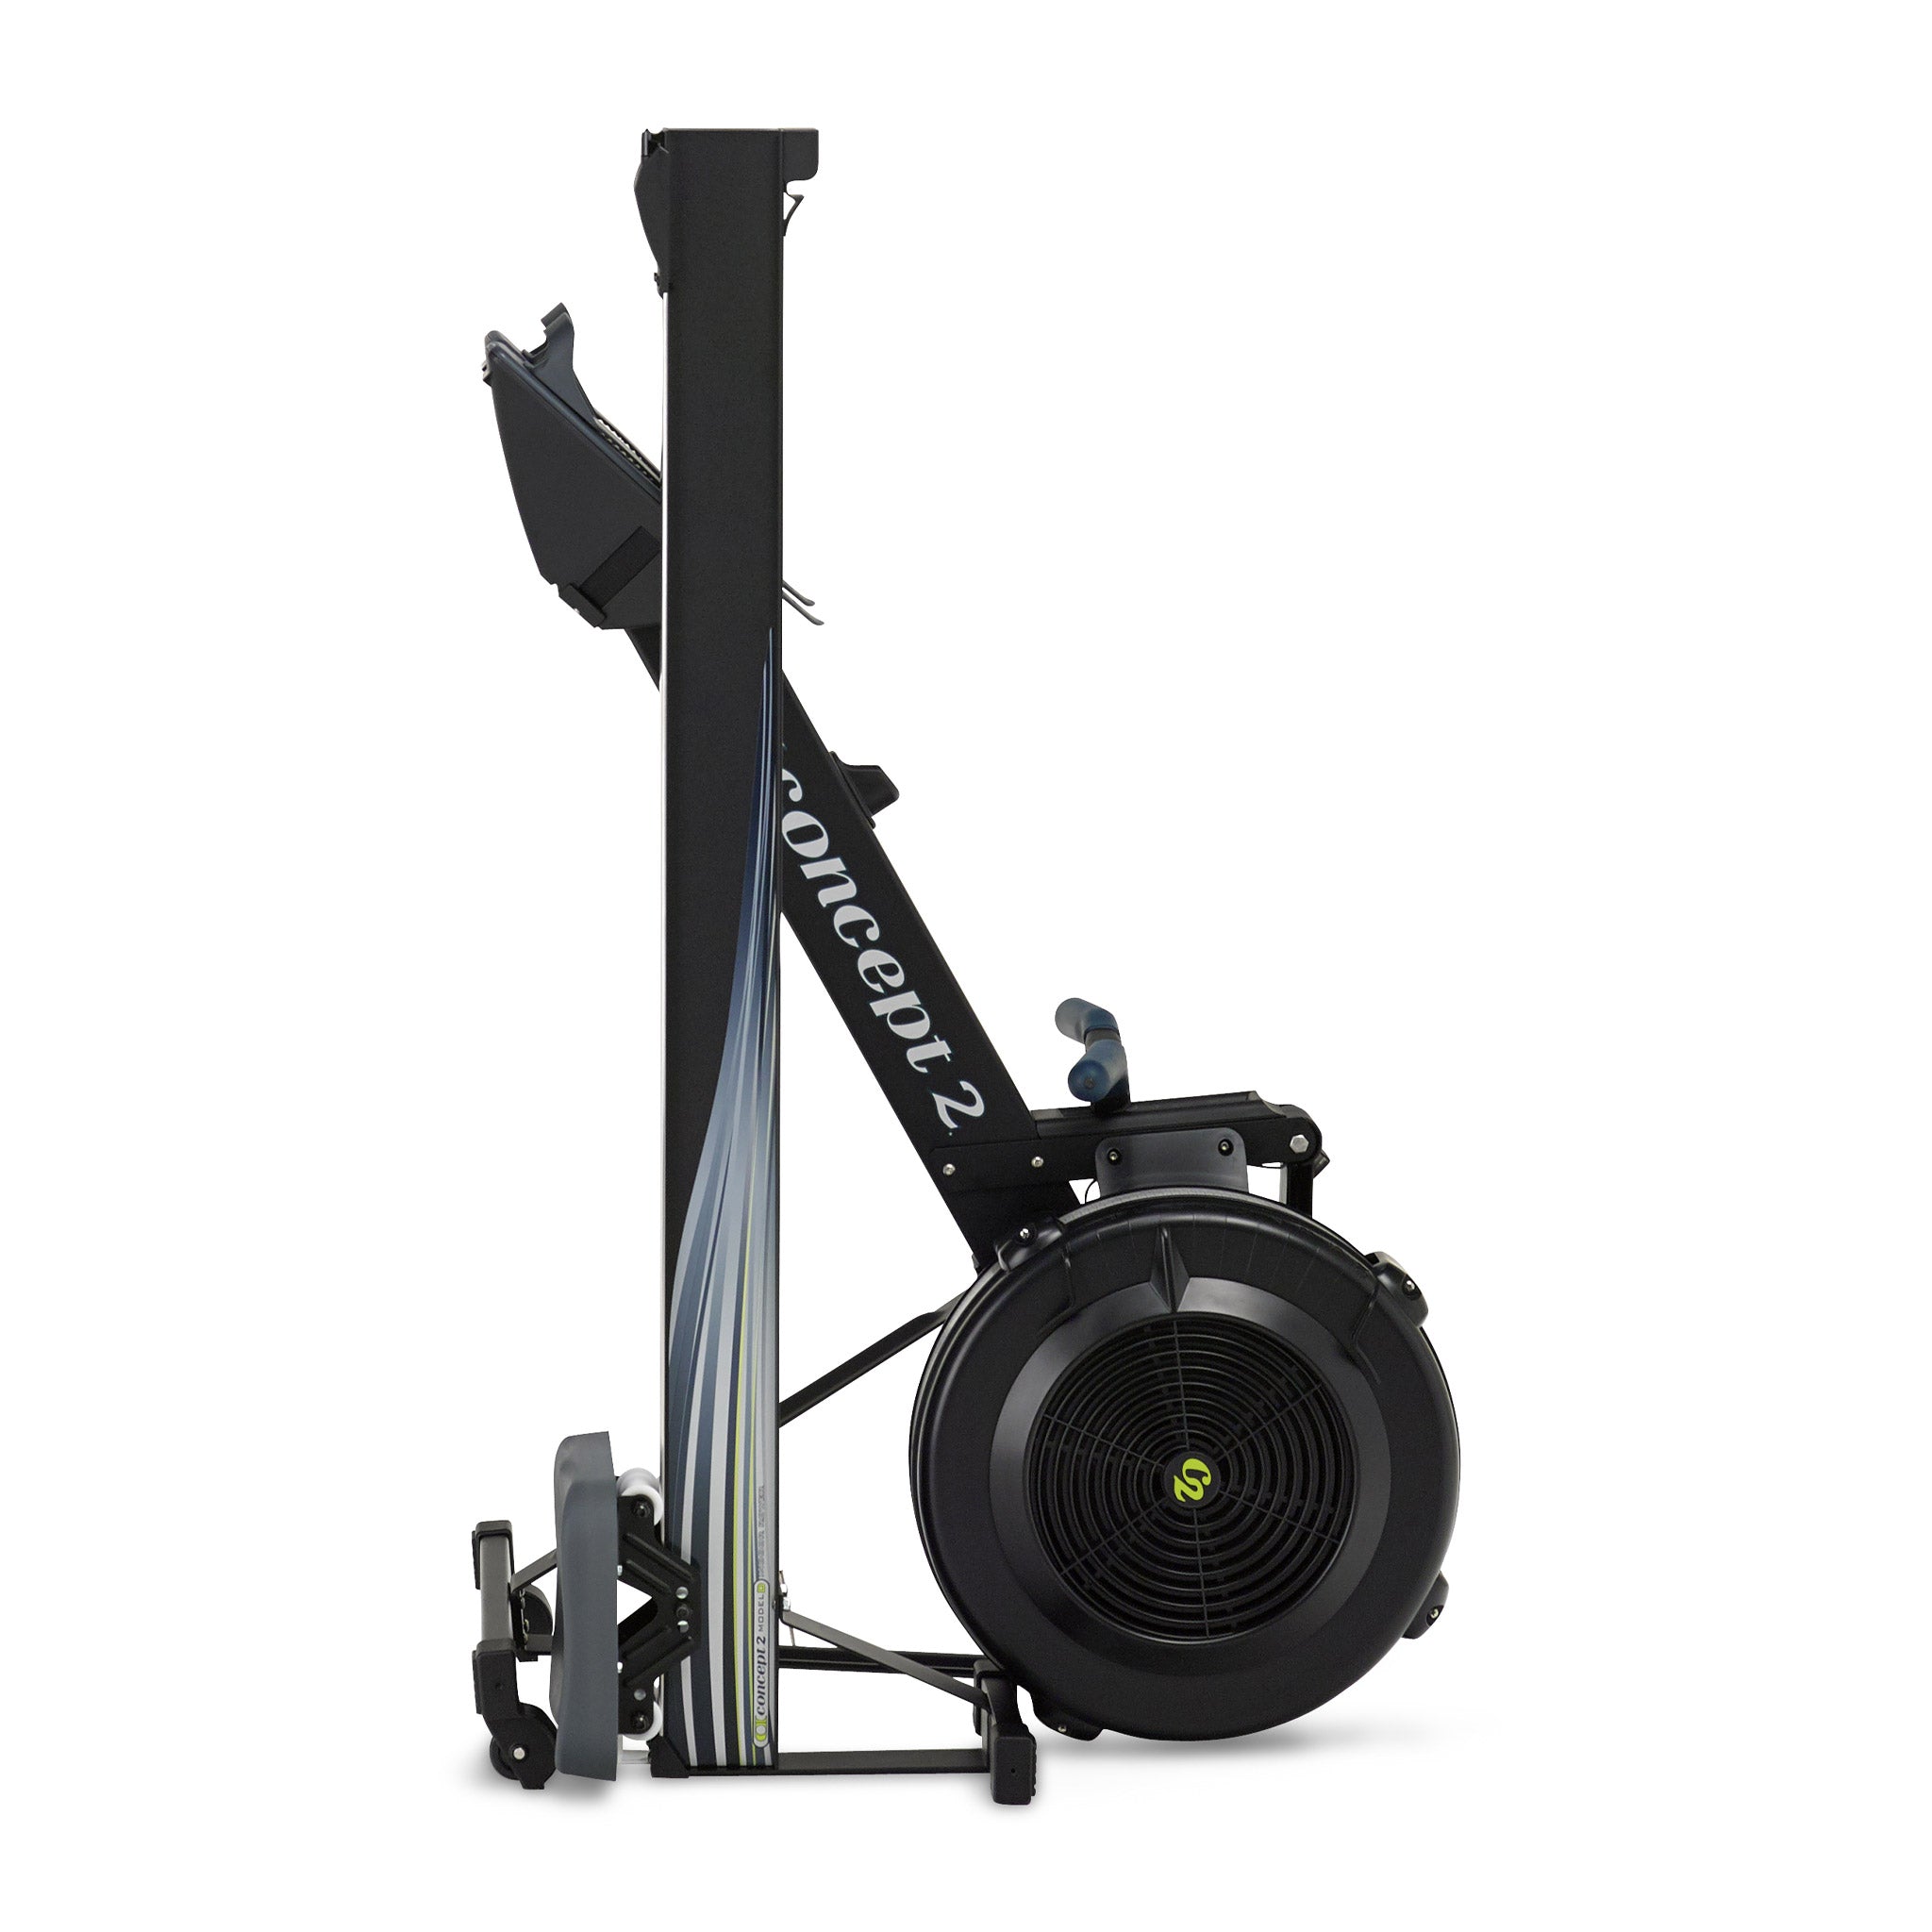 dismantled view of a concept 2 model d rowing machine in black